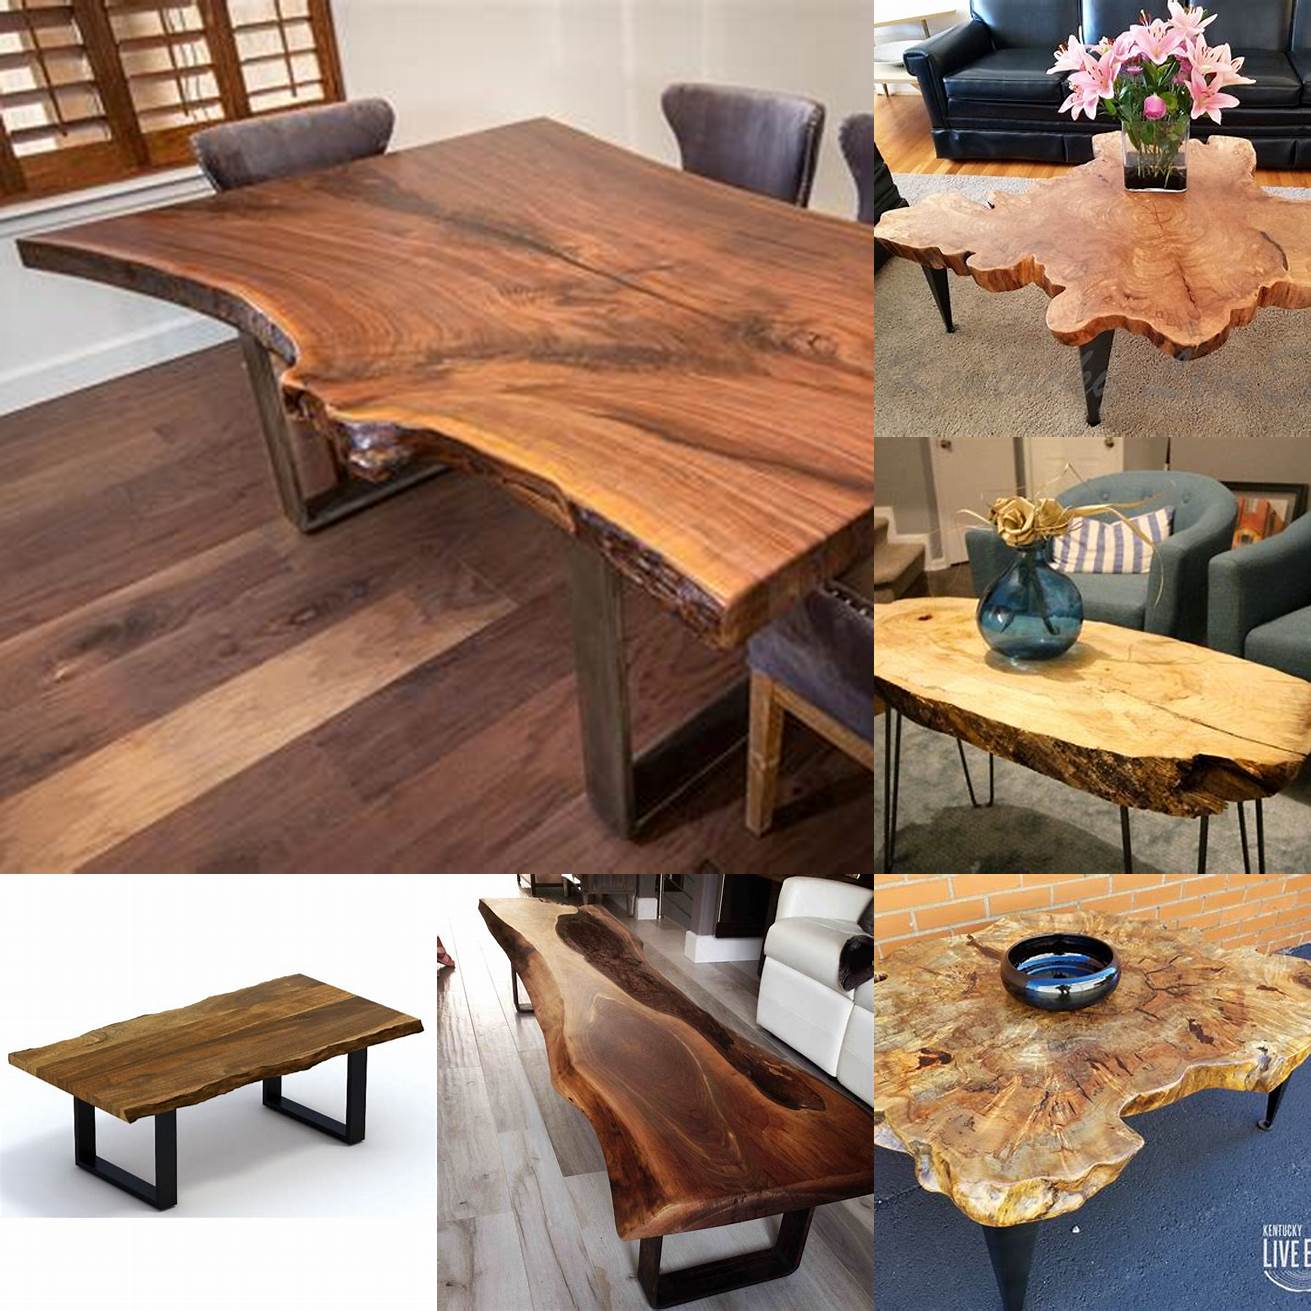 Image of a natural wood coffee table with live edge